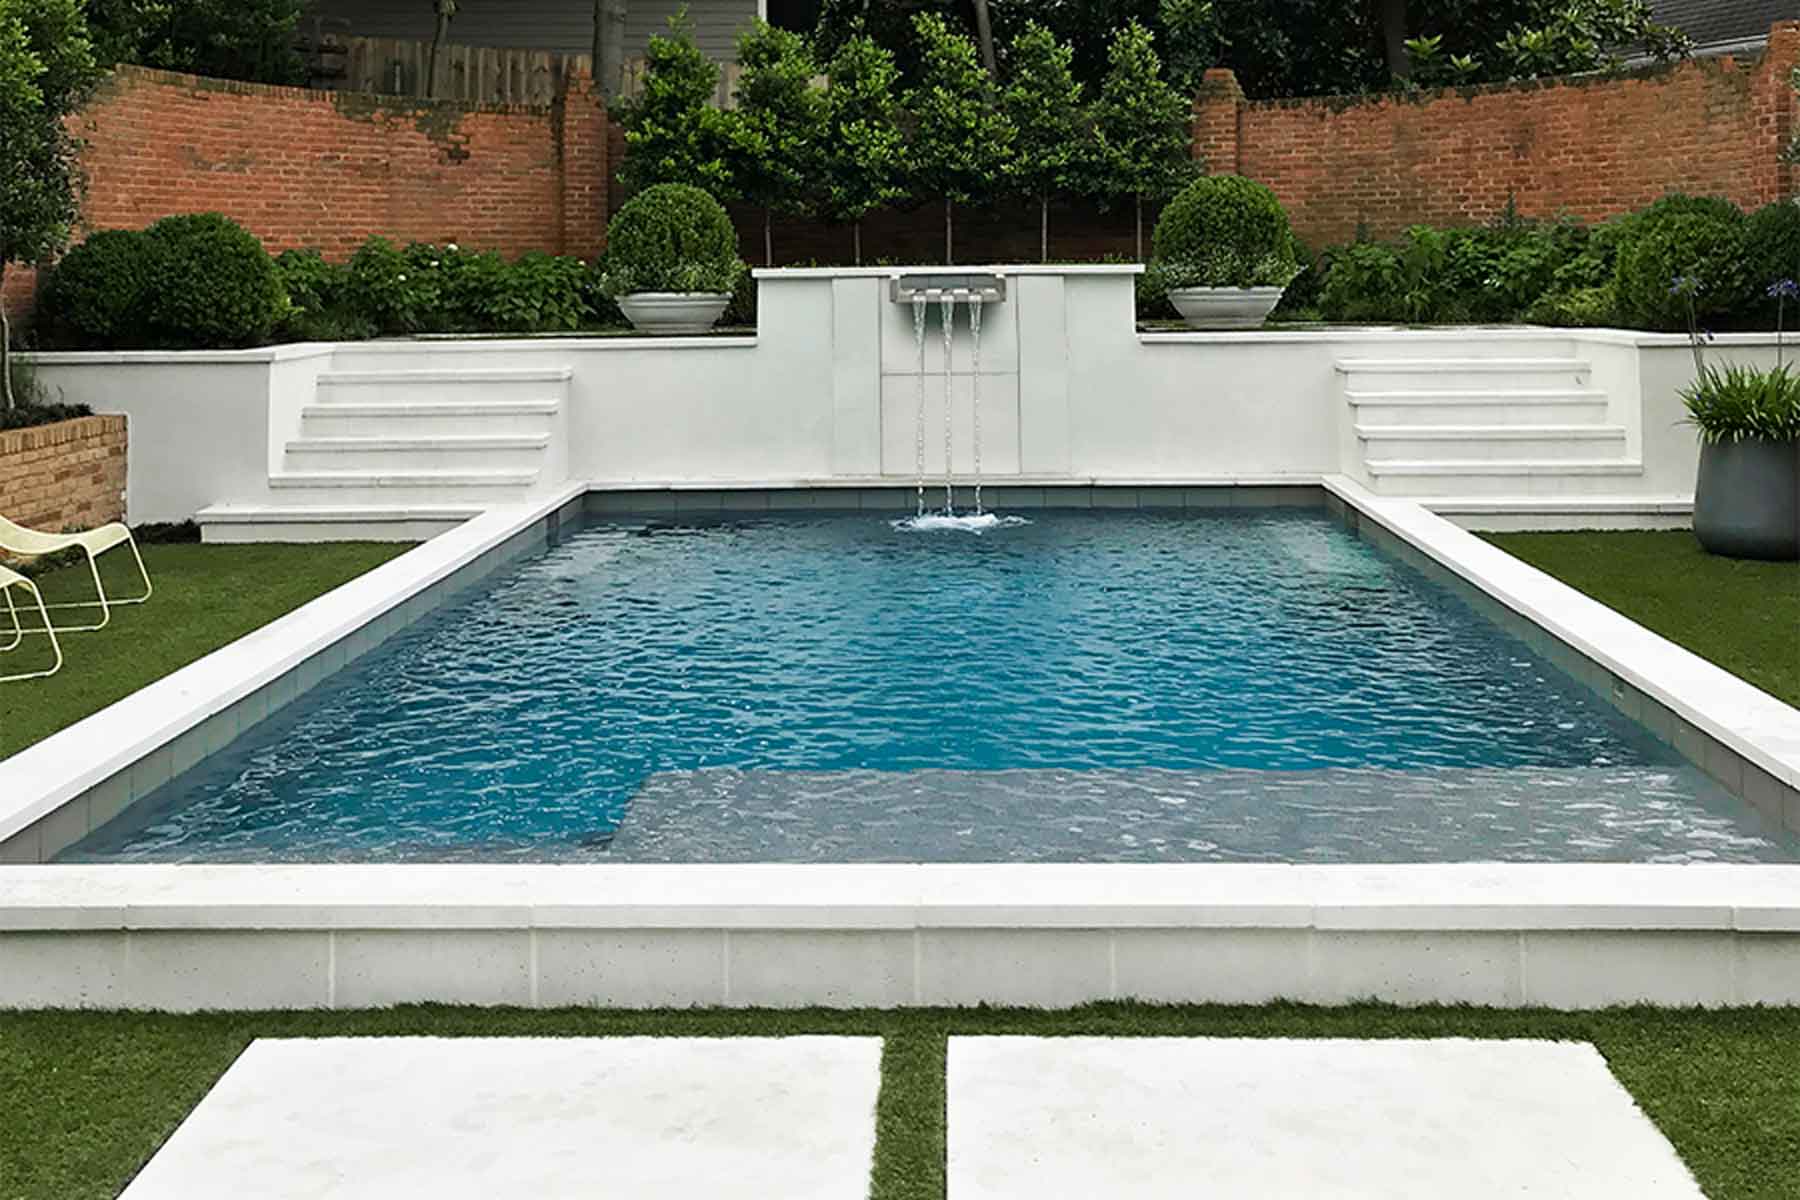 Like many of our Hardscape designs, this property has a prominent water feature